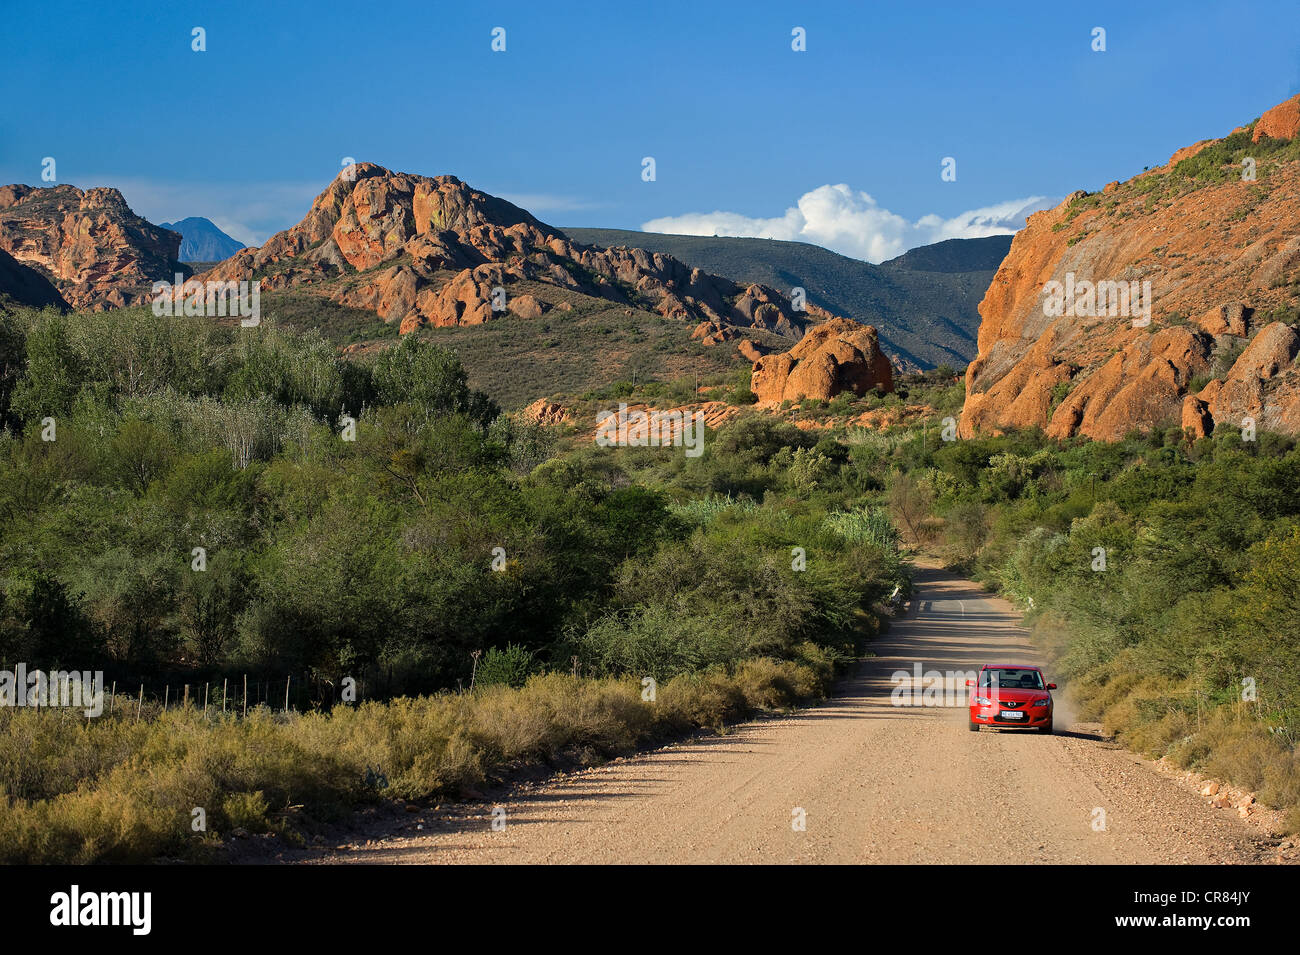 South Africa, Western Cape, Route 62, Garden Route, Little Karoo, Red Hills Stock Photo